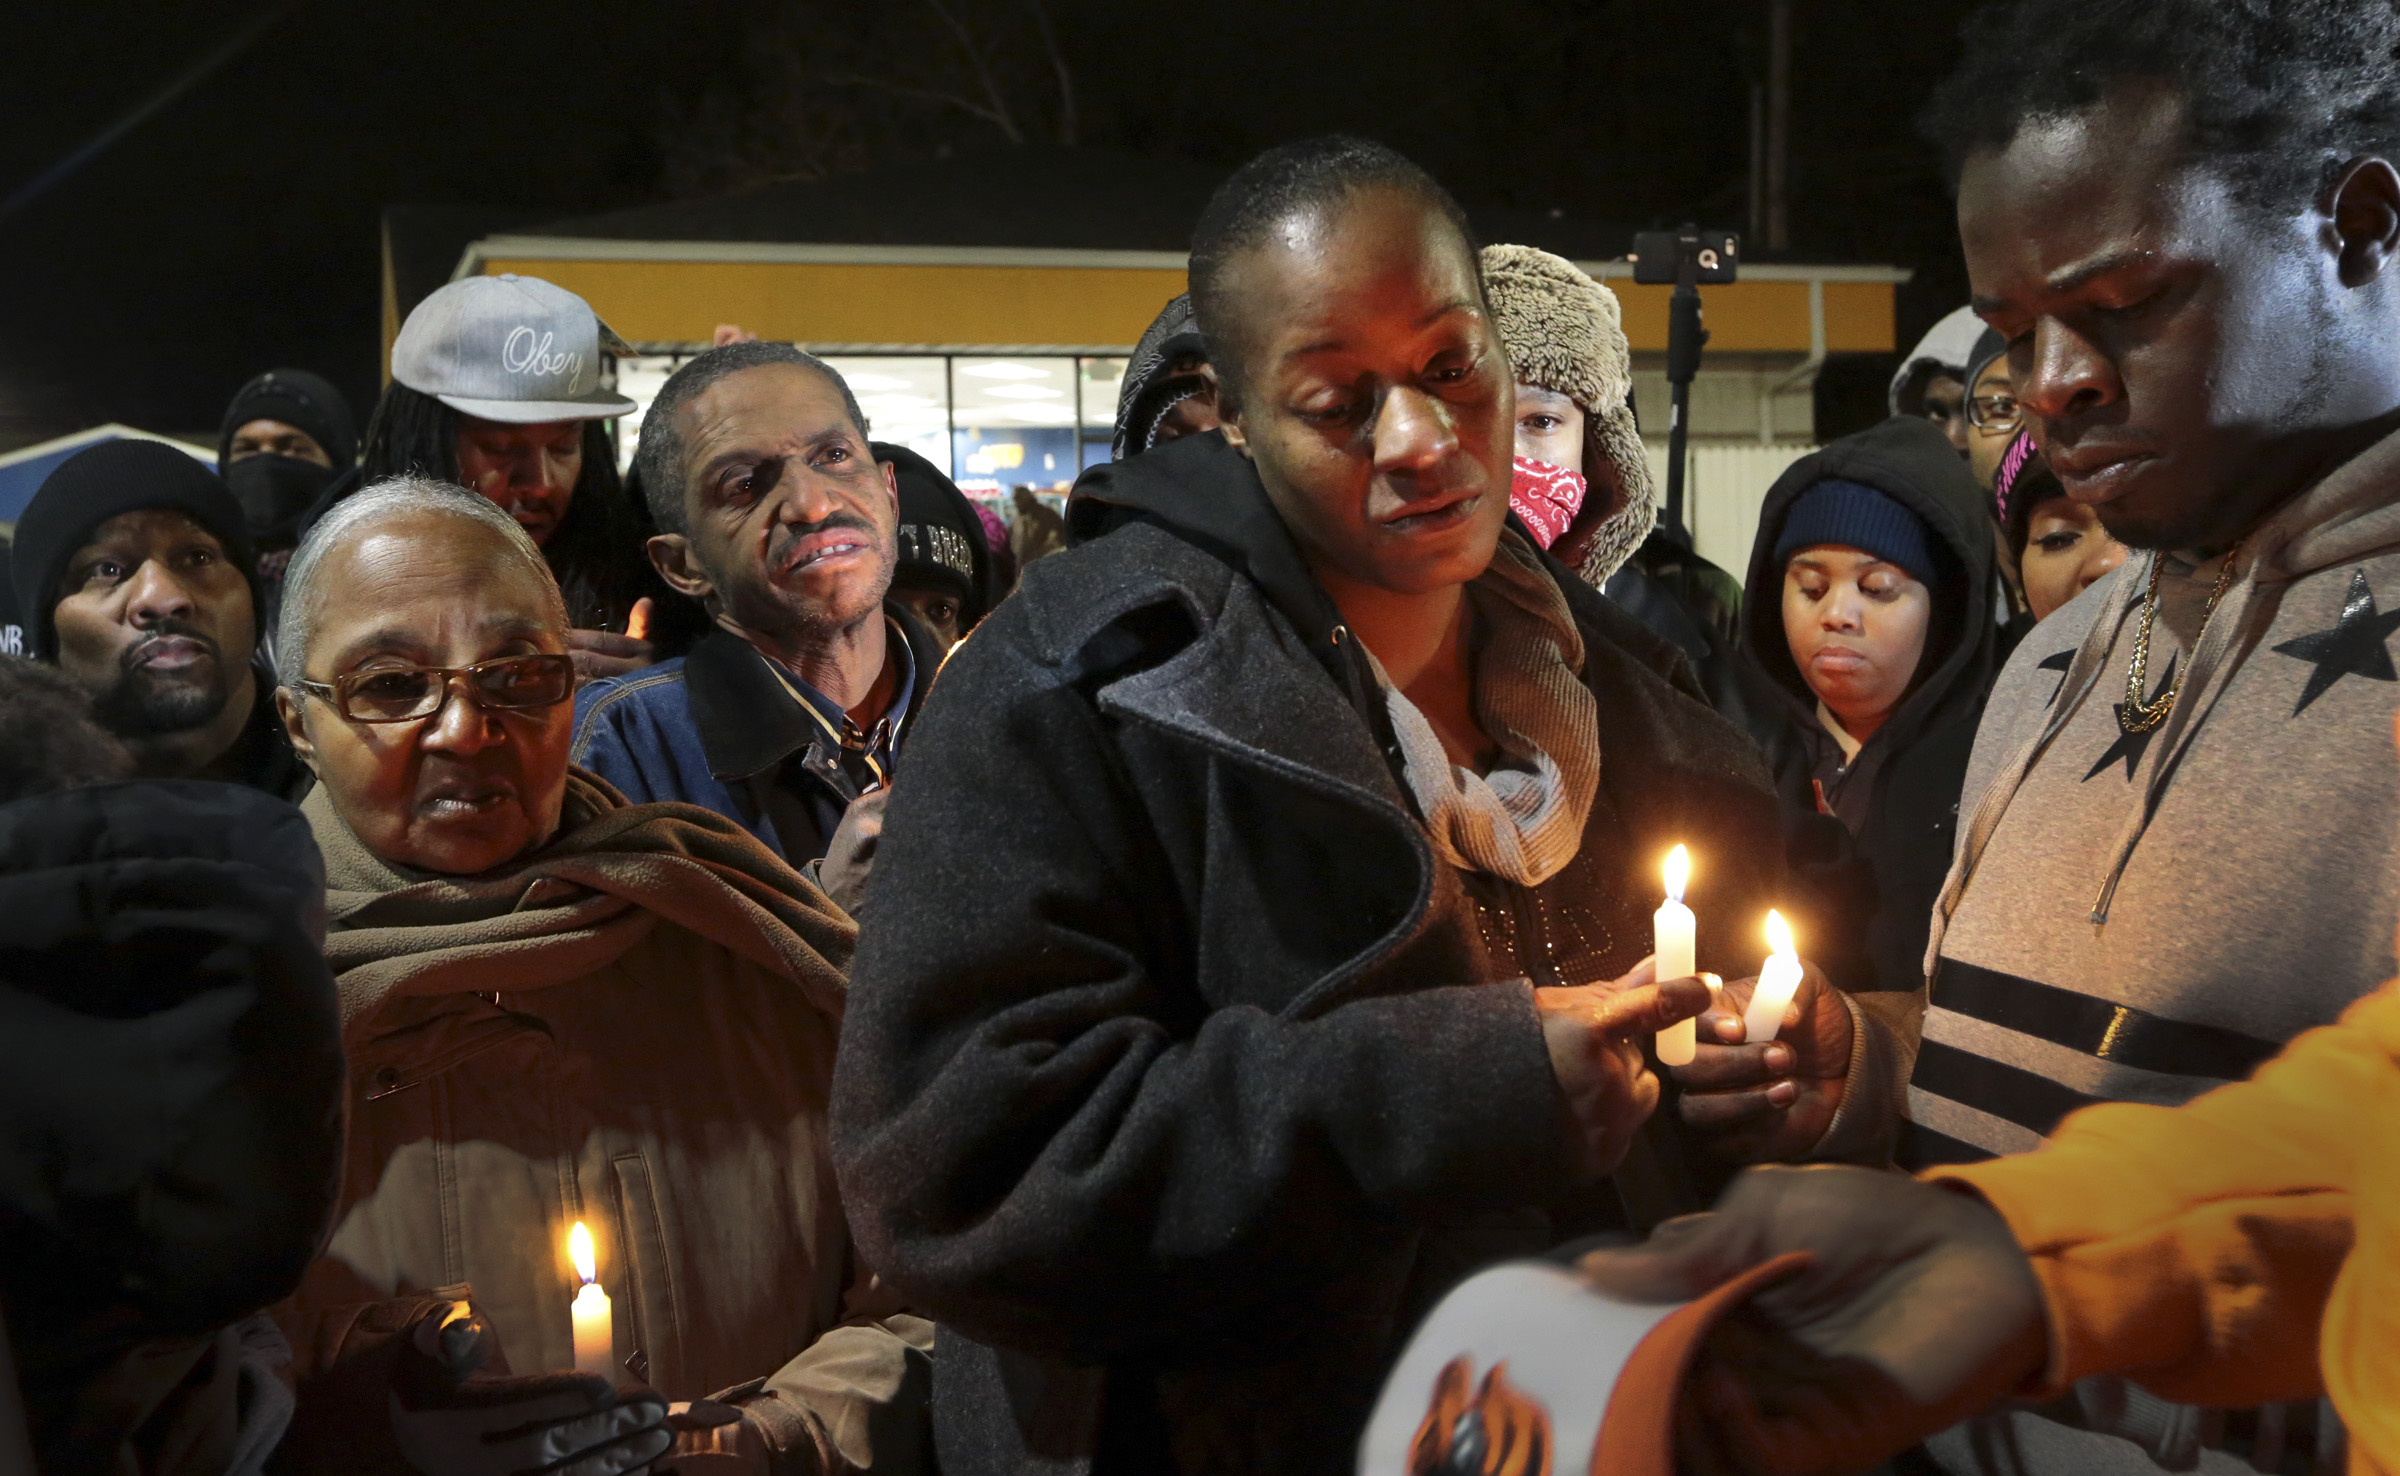 PHOTO: Toni Martin-Green, front center, and her husband Jerome Green, right, participate in a candlelight vigil at a Berkeley, Mo., gas station on Dec. 24, 2014.